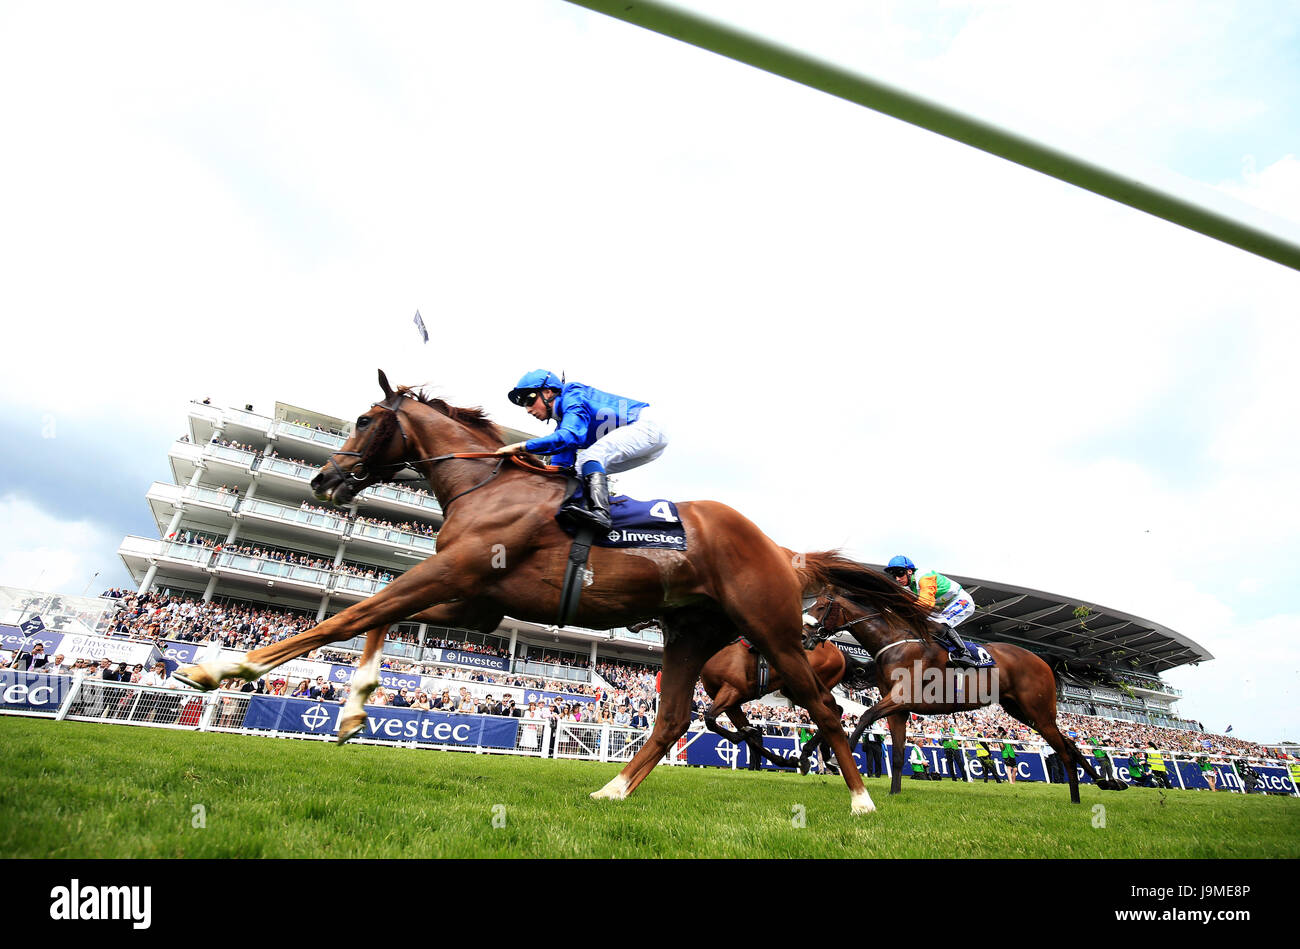 G K Chesterton ridden by William Buick (left) before winning the Investec Click & Invest Mile Handicap on Ladies Day during the 2017 Investec Epsom Derby Festival at Epsom Racecourse, Epsom. PRESS ASSOCIATION Photo. Picture date: Friday June 2, 2017. See PA story RACING Epsom. Photo credit should read: Adam Davy/PA Wire. RESTRICTIONS: any intended commercial use is subject to prior Epsom Downs Racecourse approval. No Private Sales. Call +44 (0)1158 447447 for further information Stock Photo